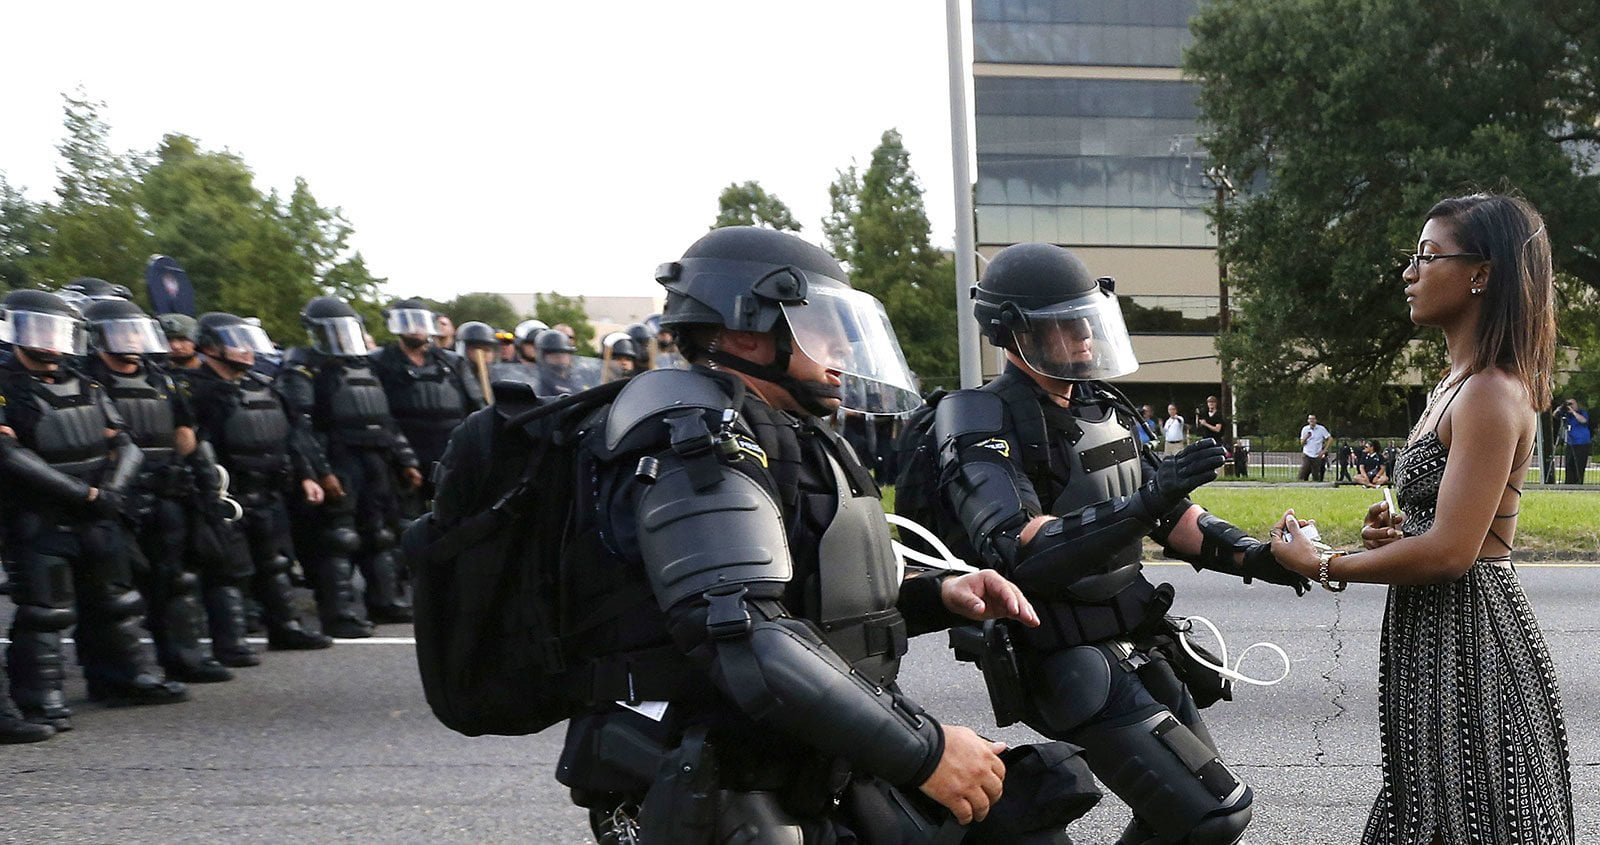 A black female demonstrator stands still in the street as US police officers in riot gear rush toward her. Behind them is a line of police officers also in riot gear.